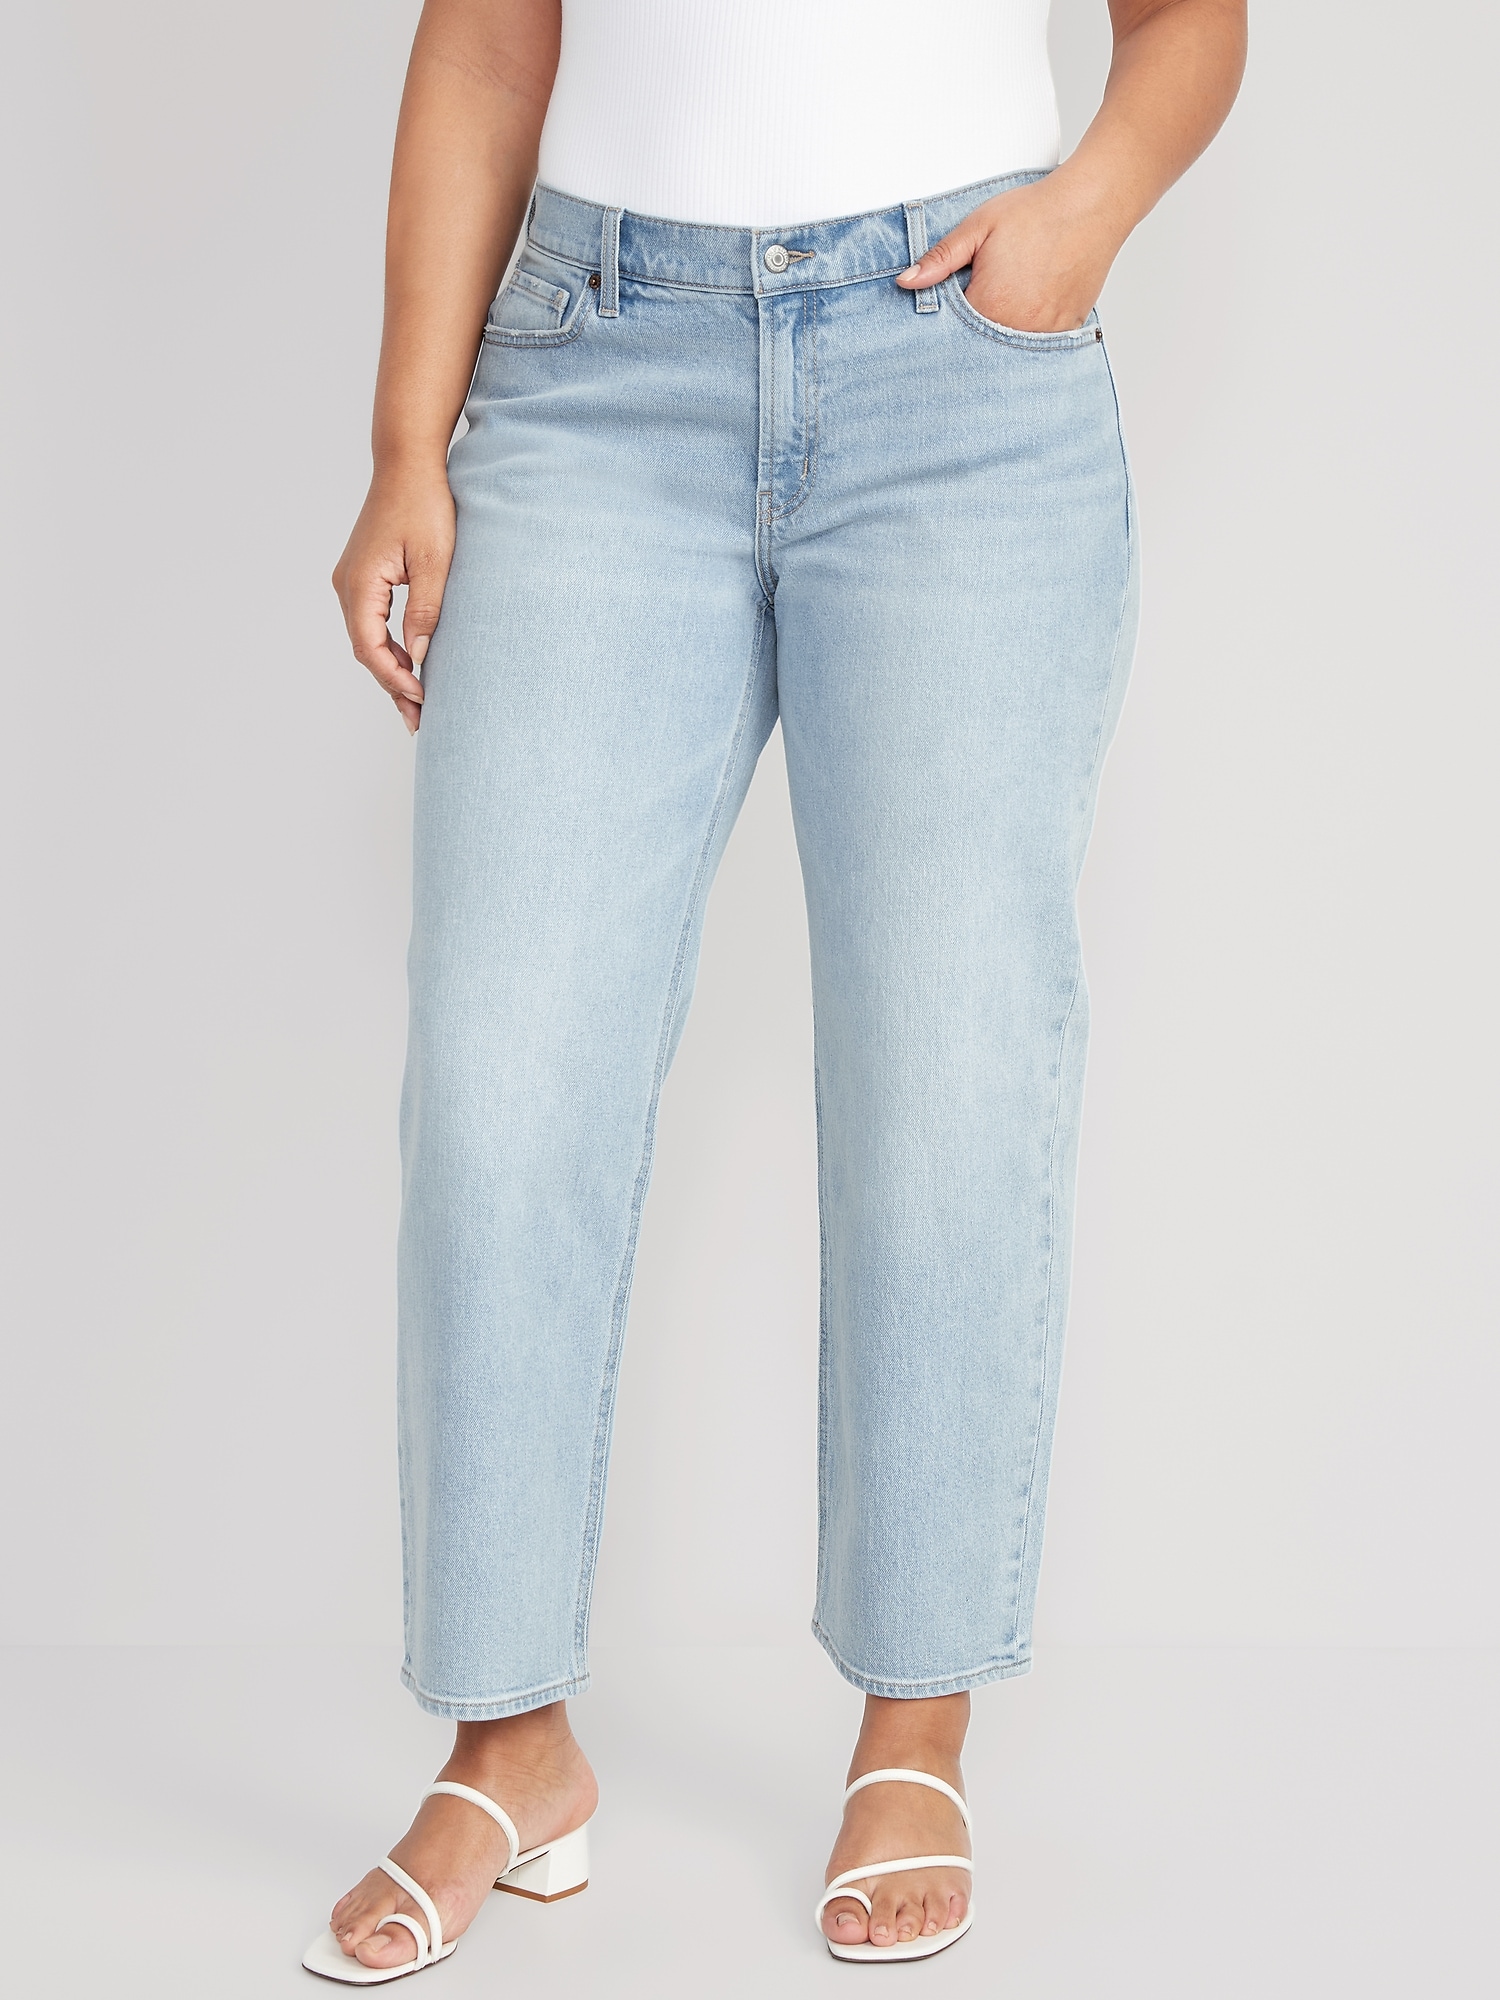 Everlane: Its Length Great for Petites, Holes aren't Too Low